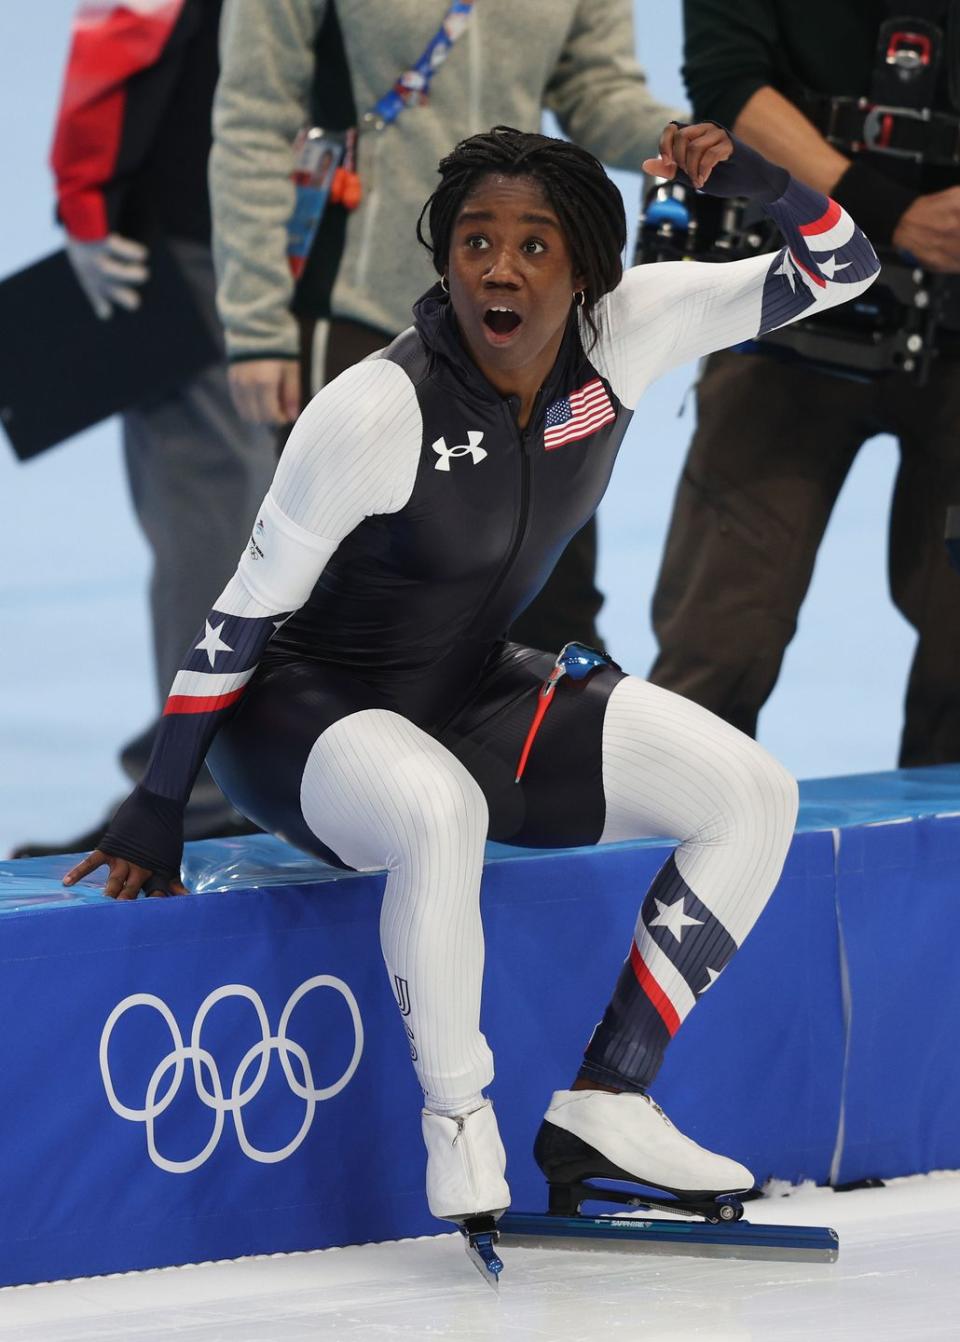 erin jackson winning a medal in speed skating at the olympics